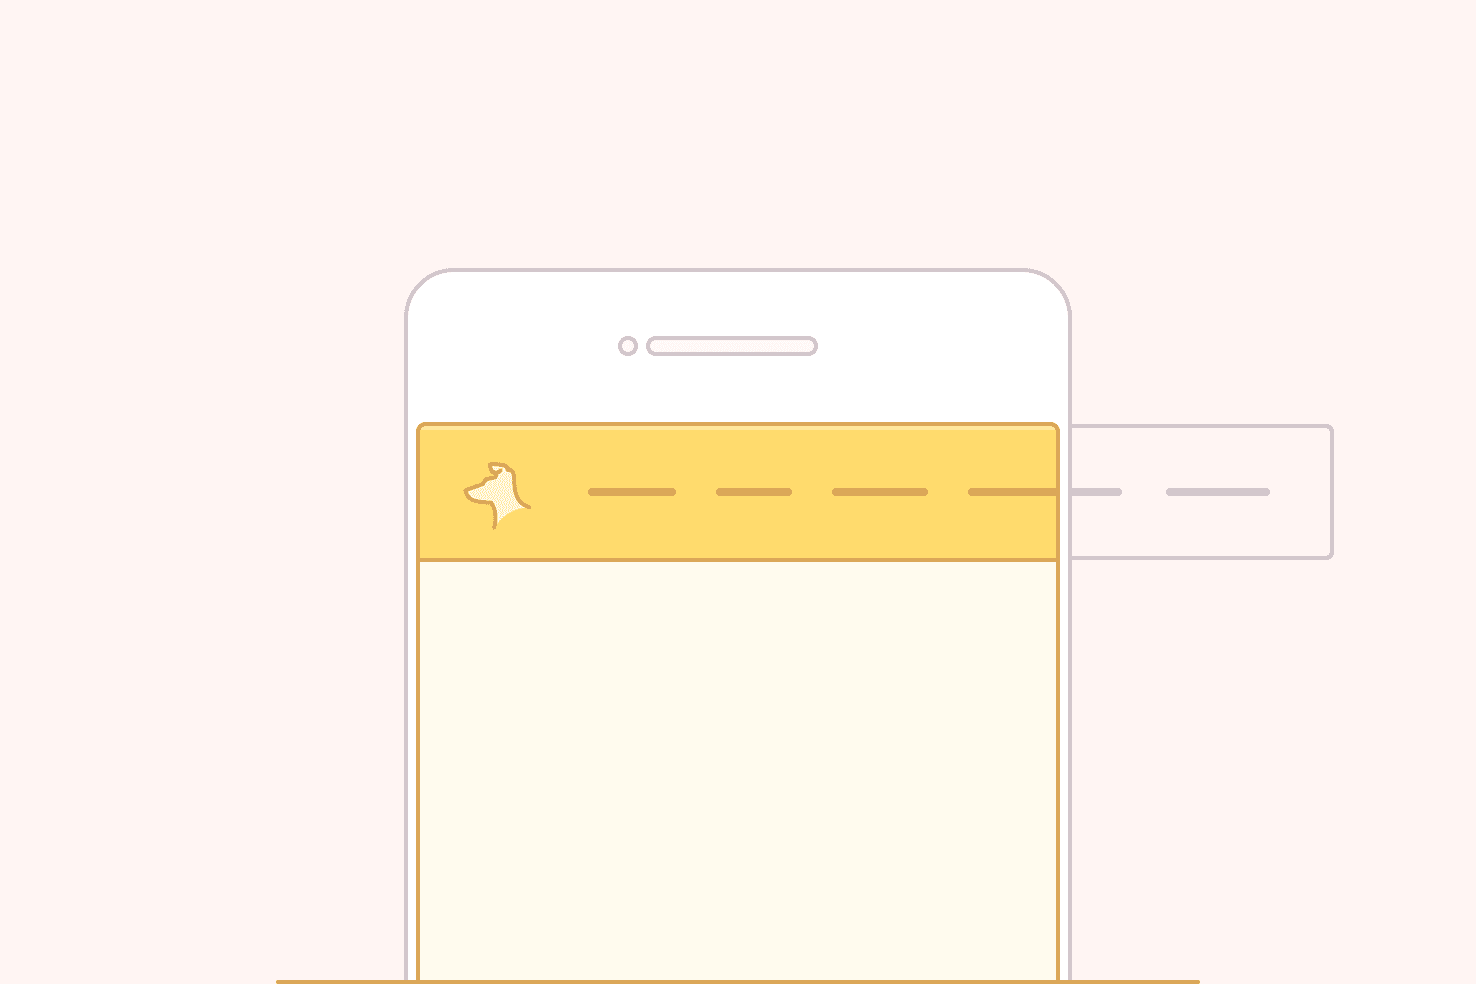 Using flexbox for horizontal scrolling navigation (featured image)